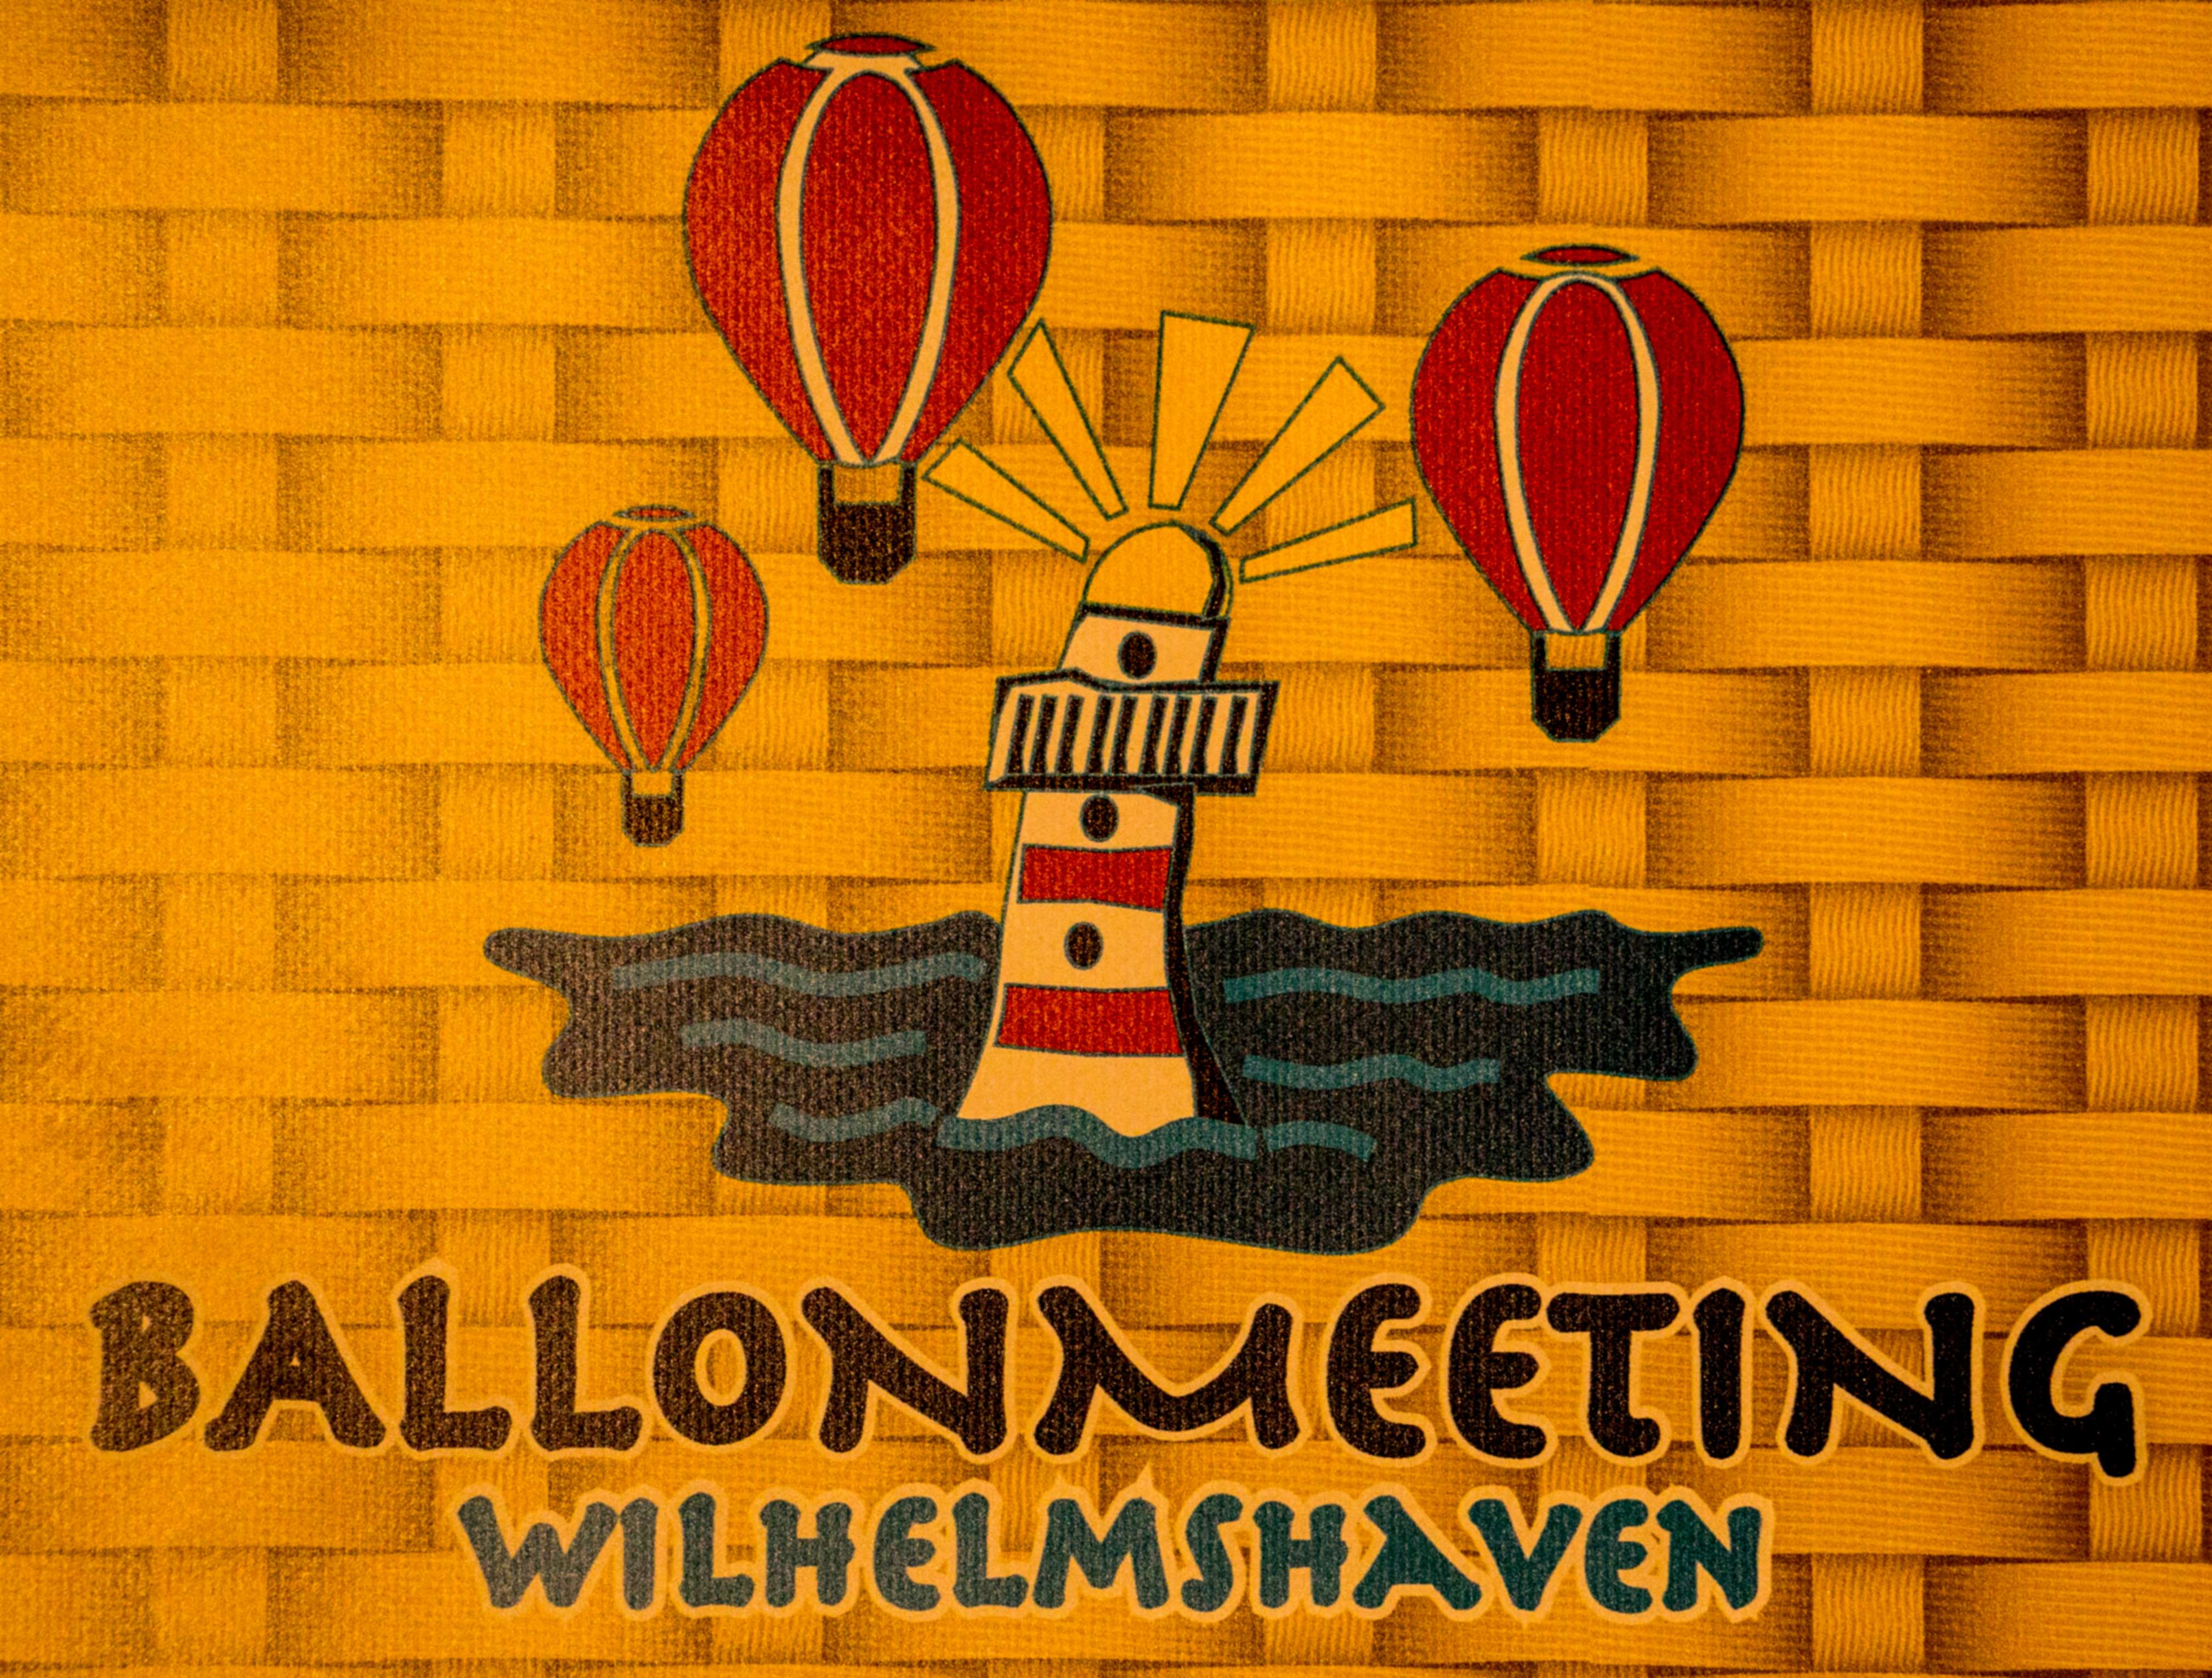 You are currently viewing Ballonmeeting Wilhelmshaven 2017